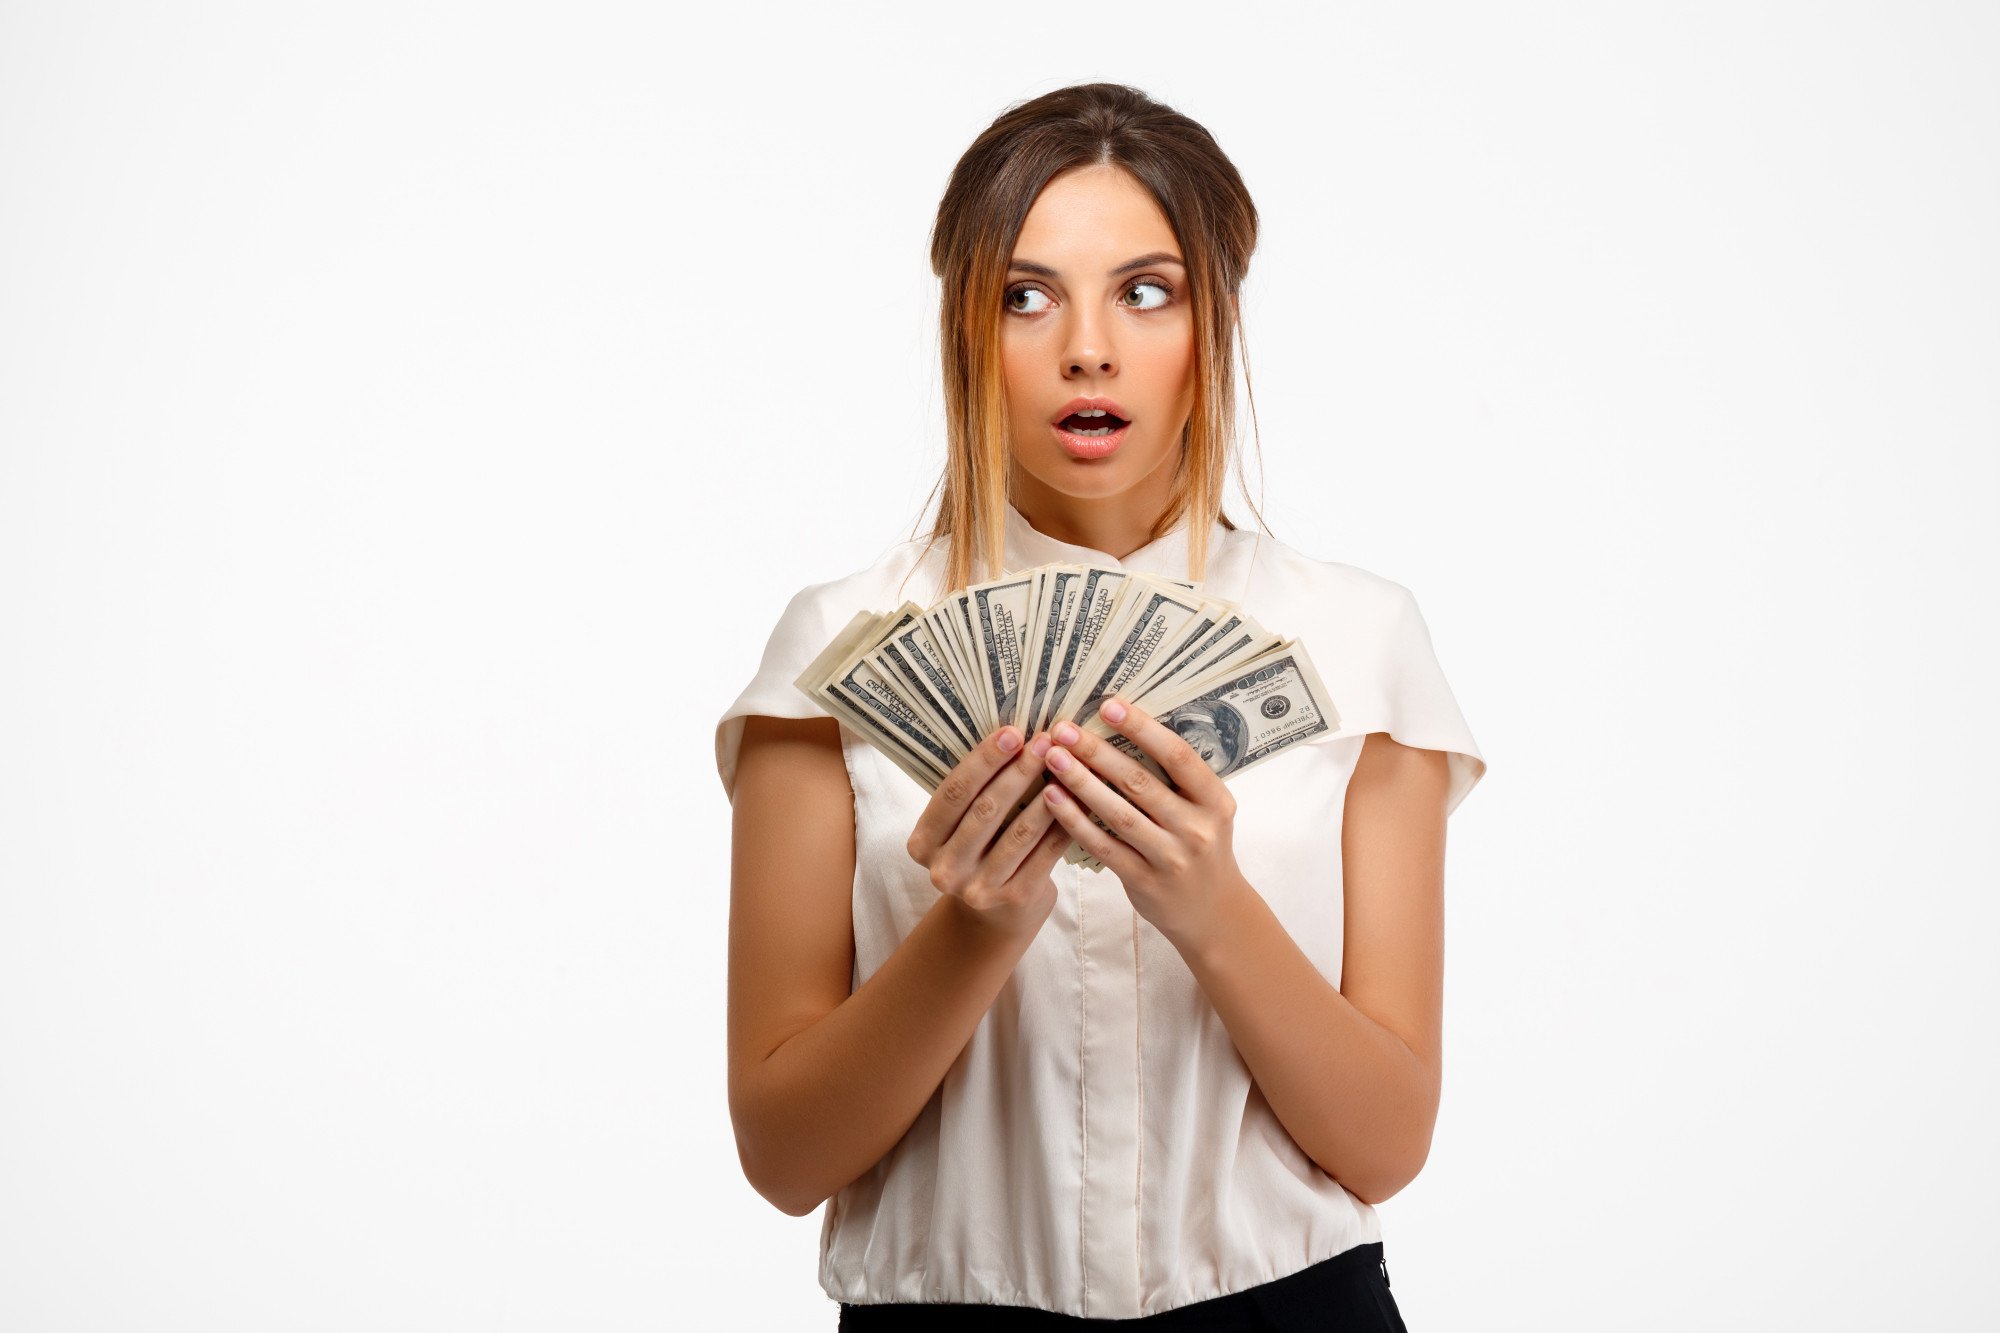 A young woman with a look of surprise while holding money | Source: Freepik